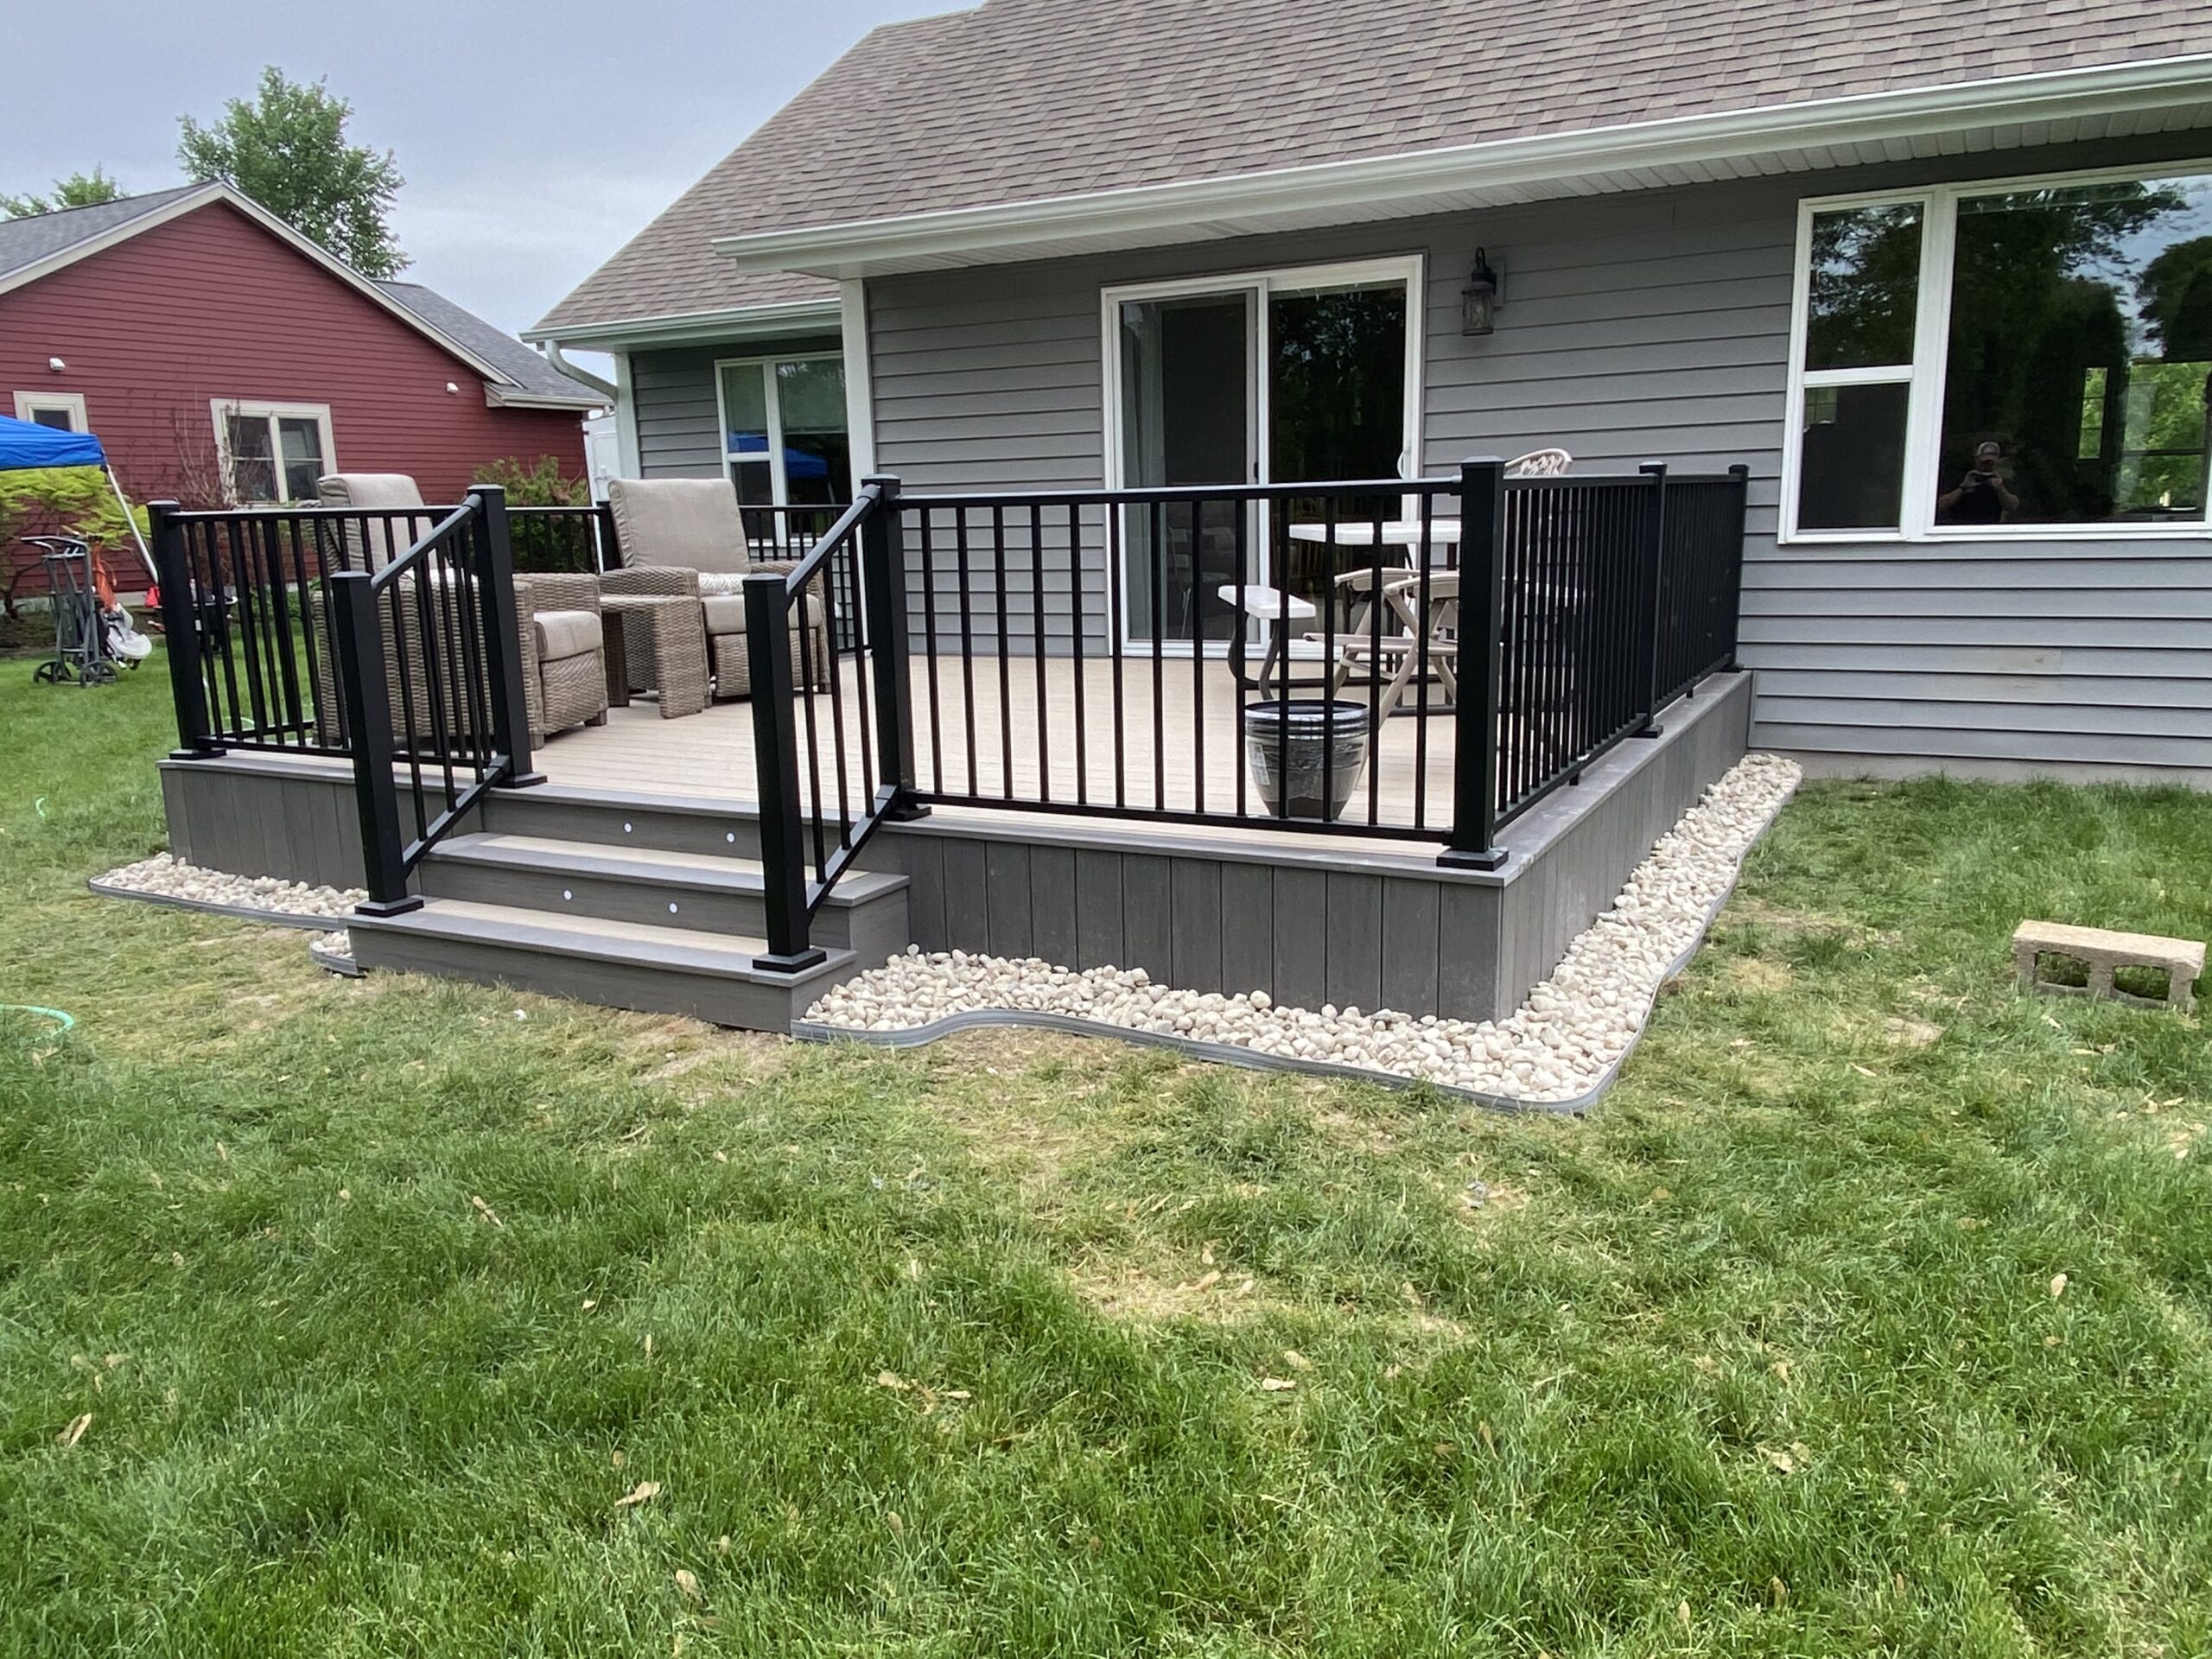 Photo of Rectangular Deck with Black Metal Rails - Custom Composite Deck builder and contractor Washington County, WI